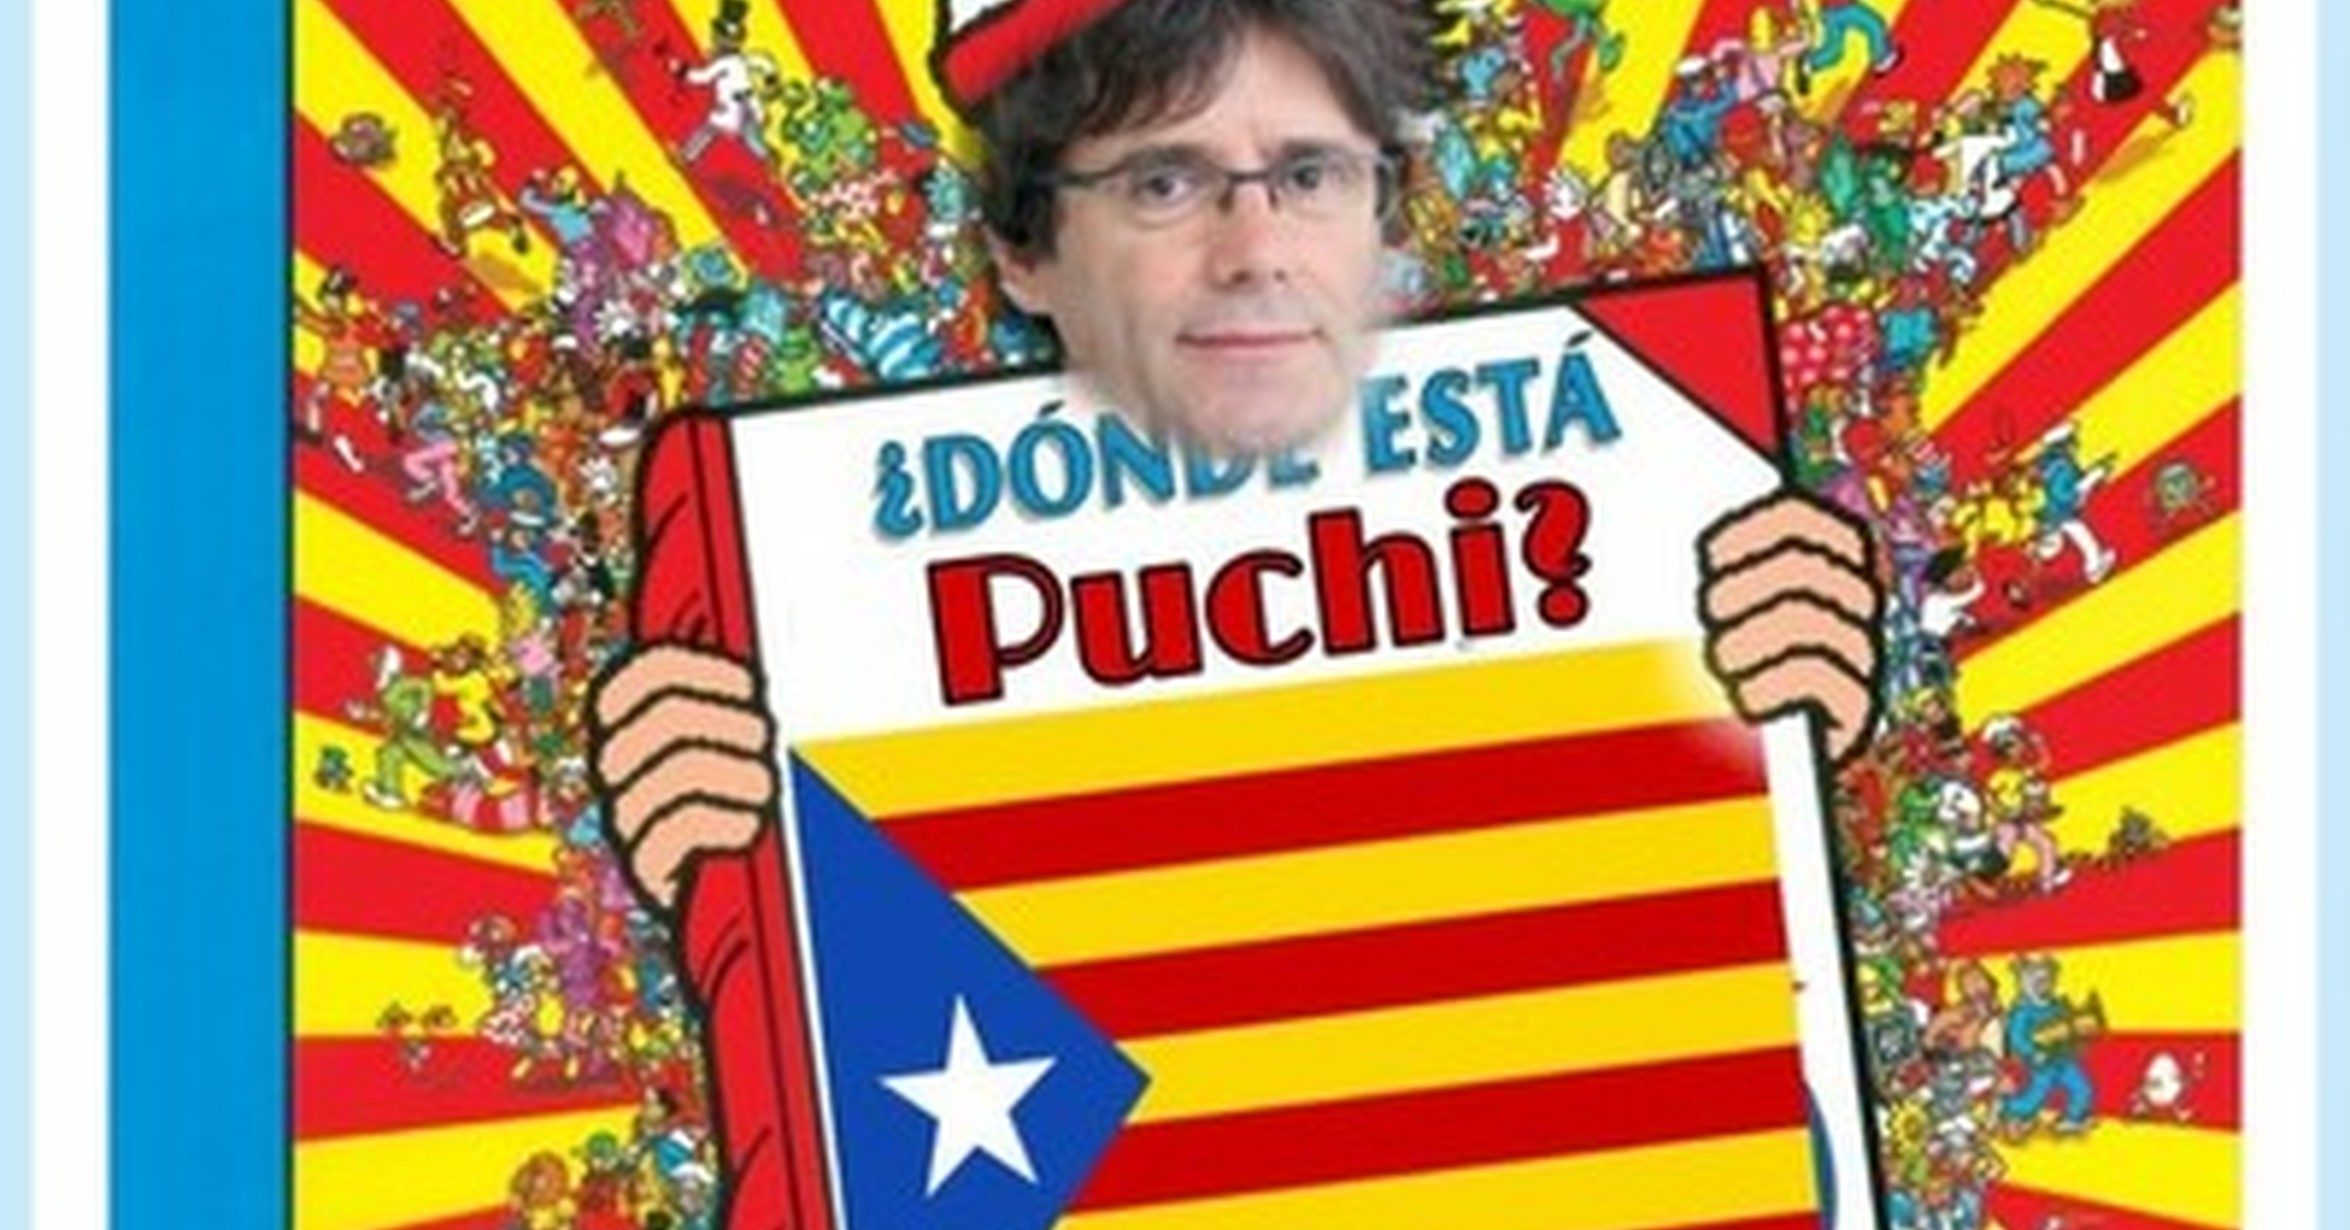 wally puigdemont